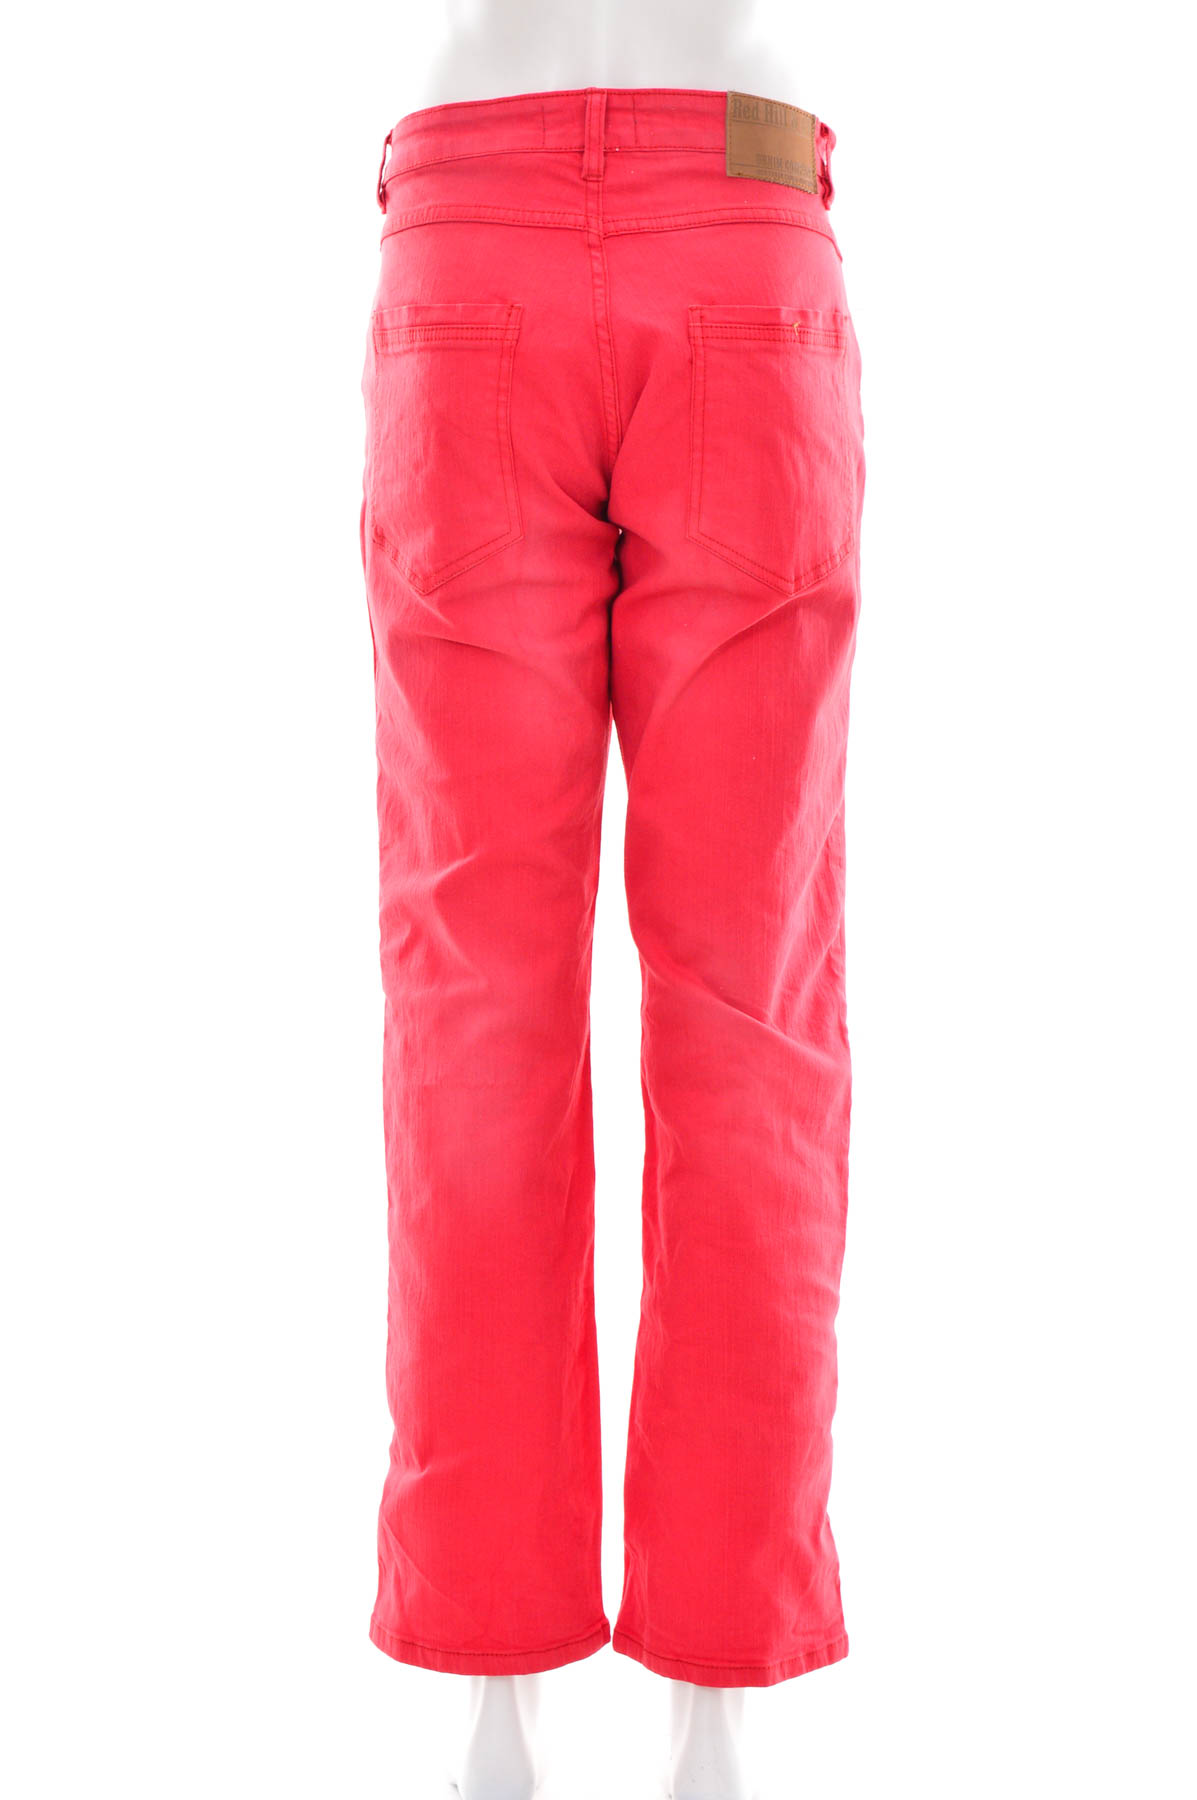 Men's trousers - Red Hill & Co. - 1